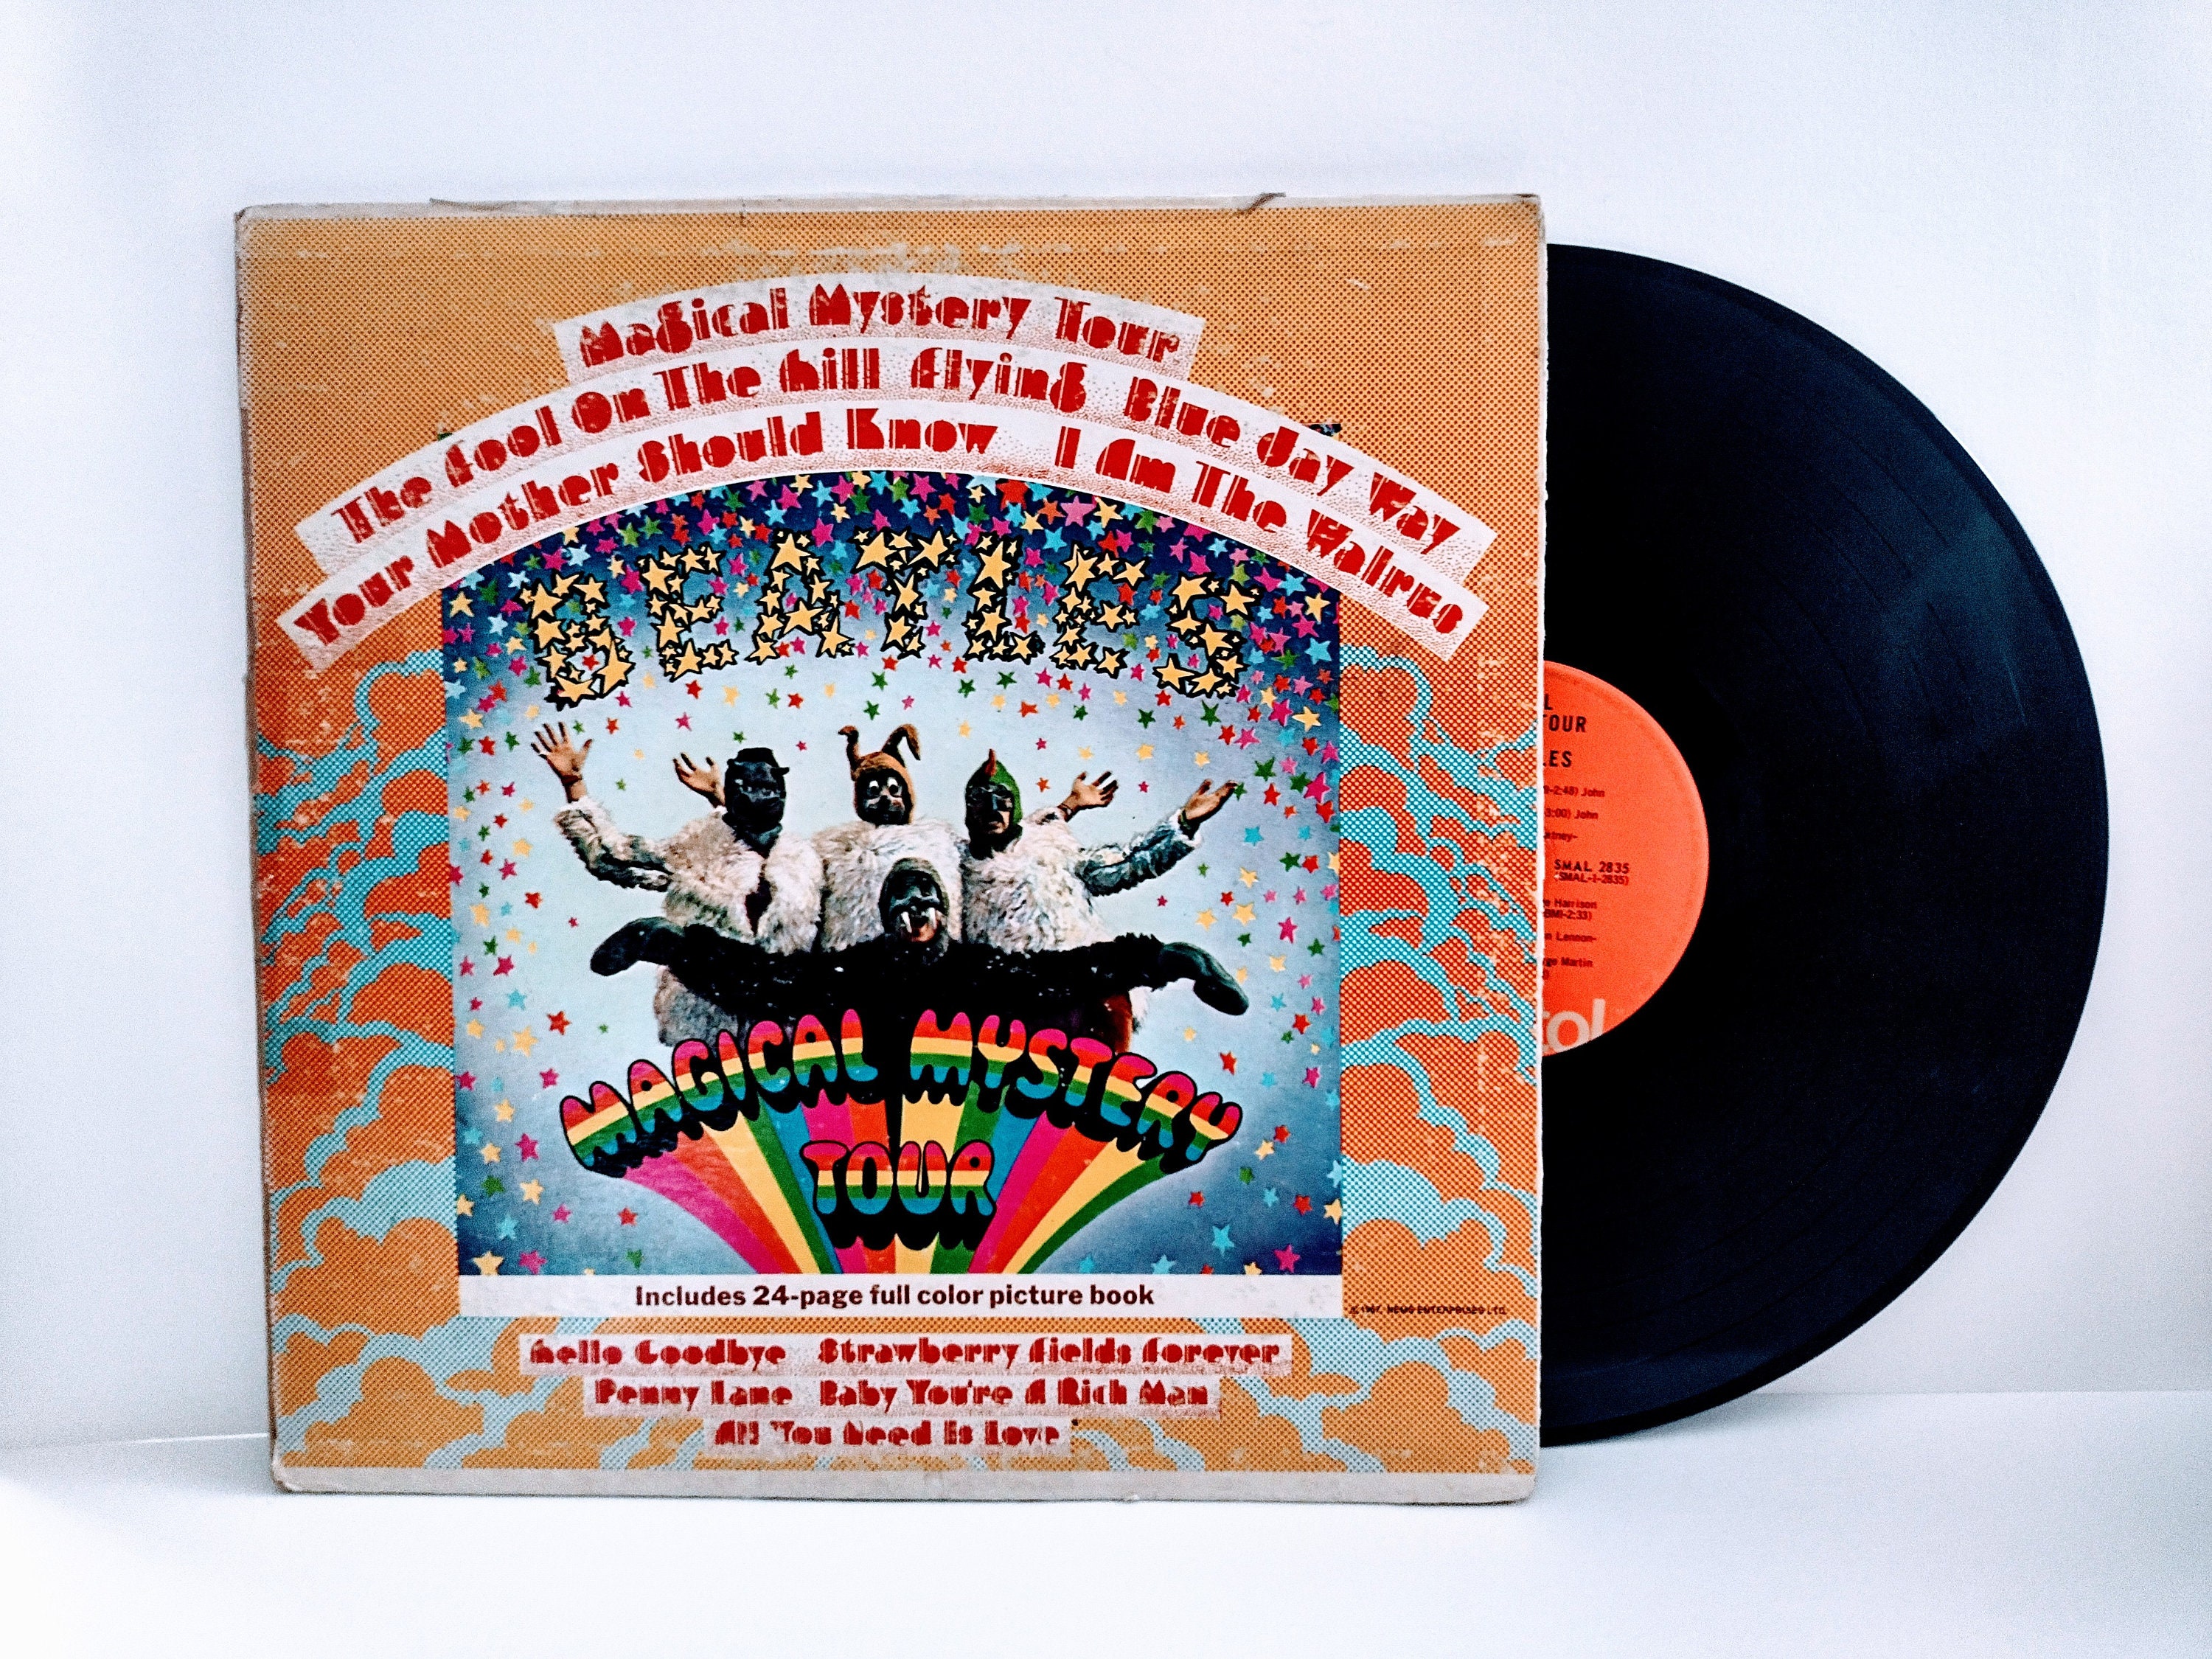 THE BEATLES Magical Mystery Tour Vintage 1967 Vinyl Record - Etsy